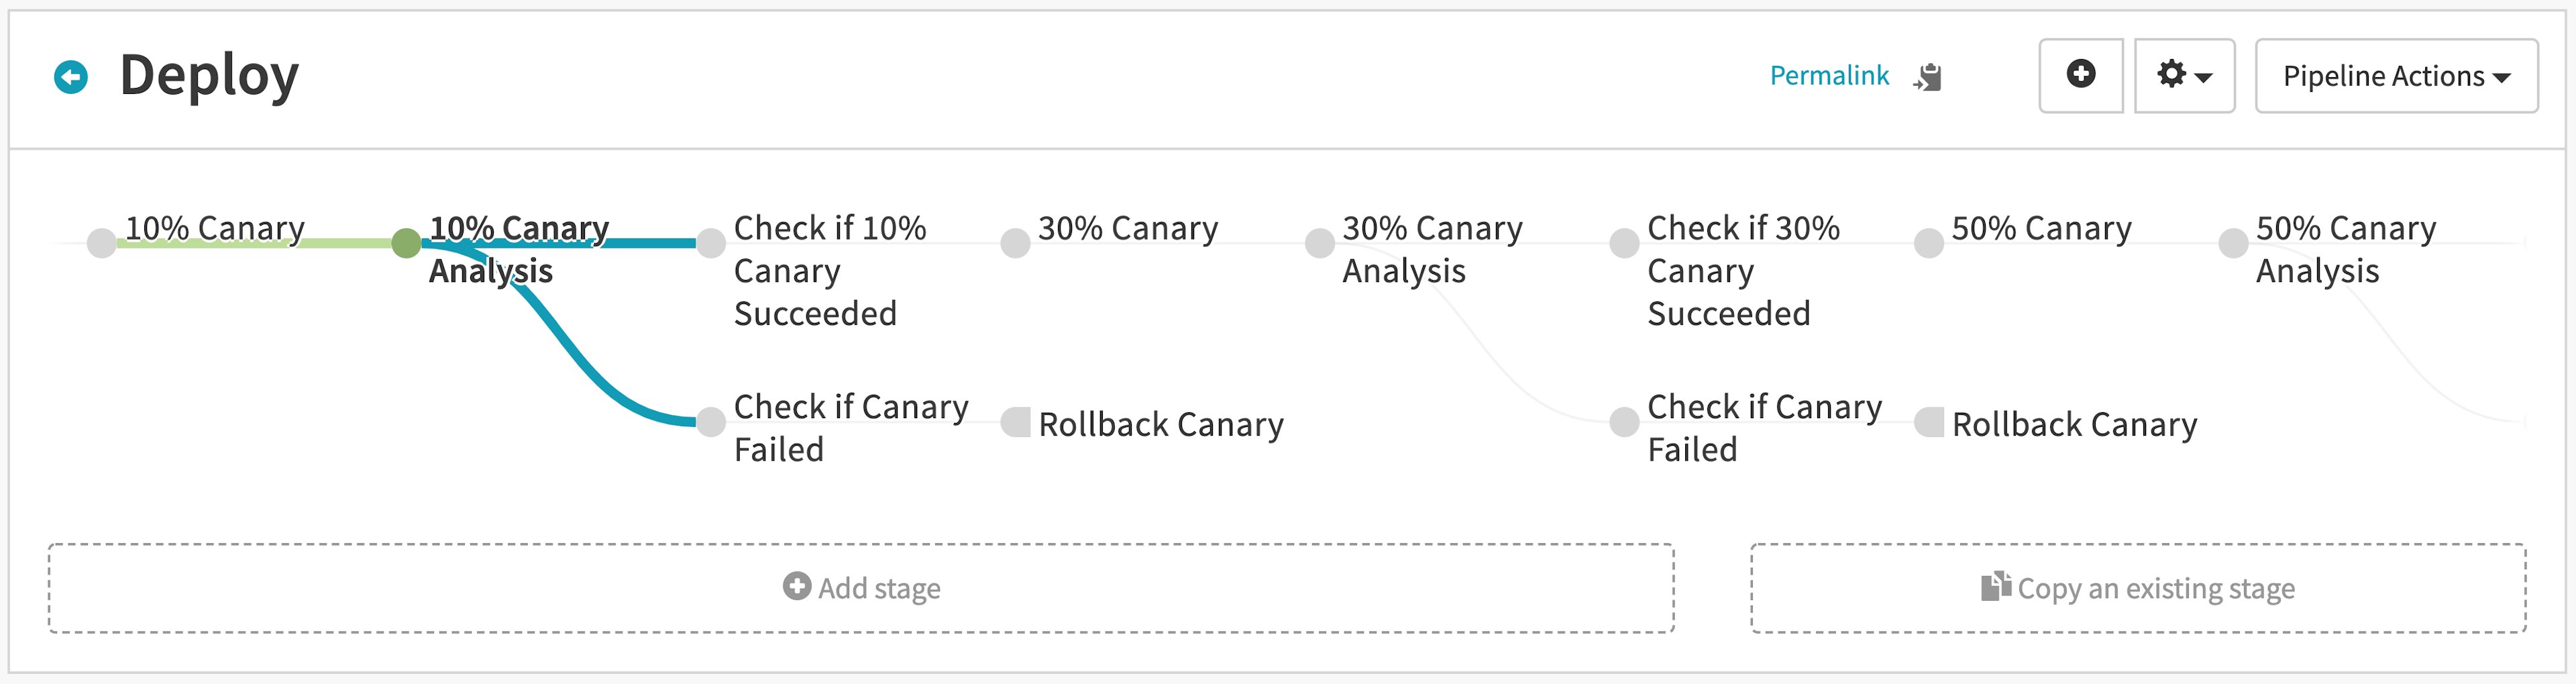 Deployment pipeline increments traffic to canary by 20% each stage